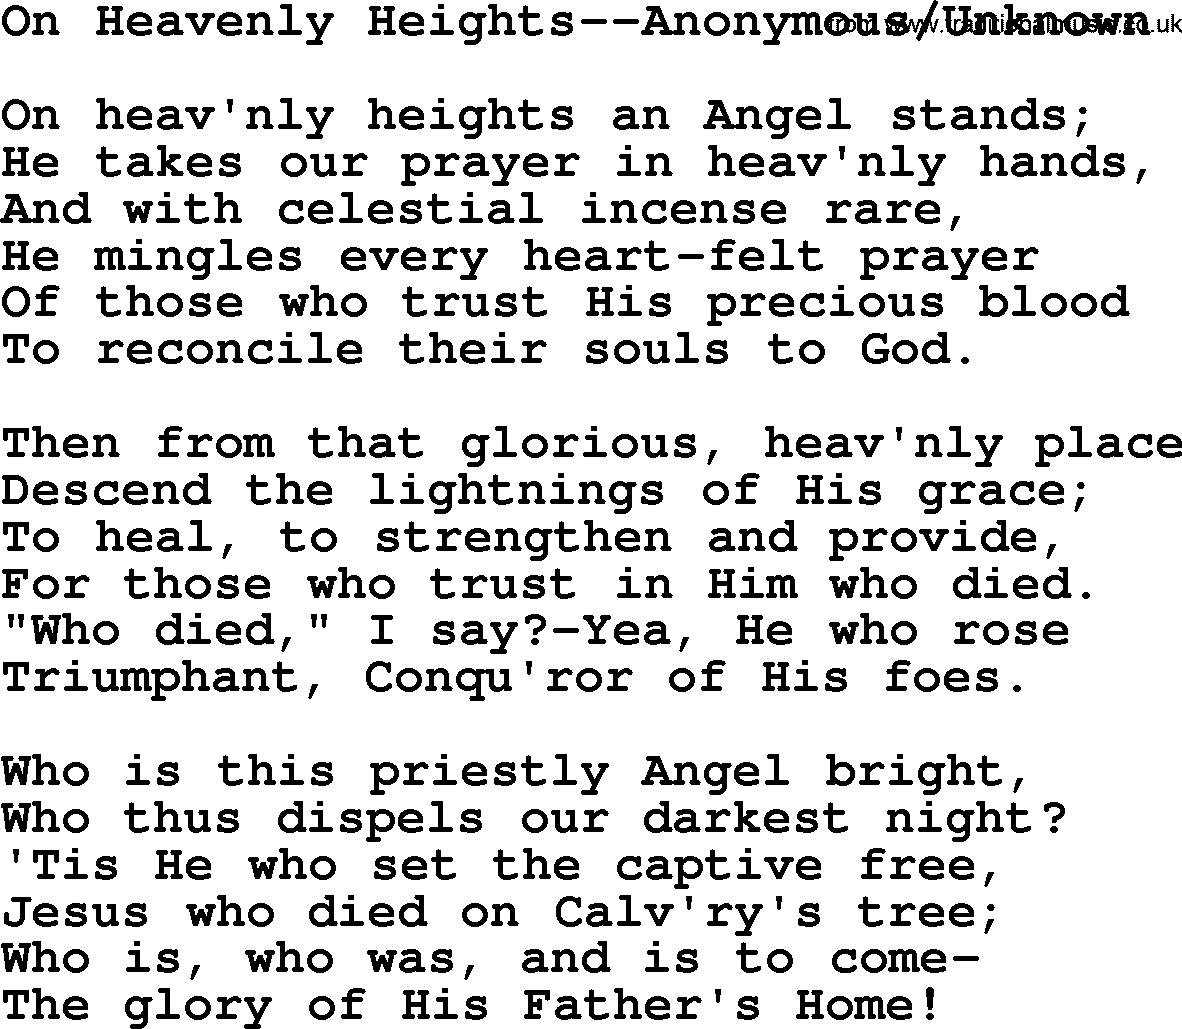 Hymns about Angels, Hymn: On Heavenly Heights--anonymous_unknown.txt lyrics with PDF